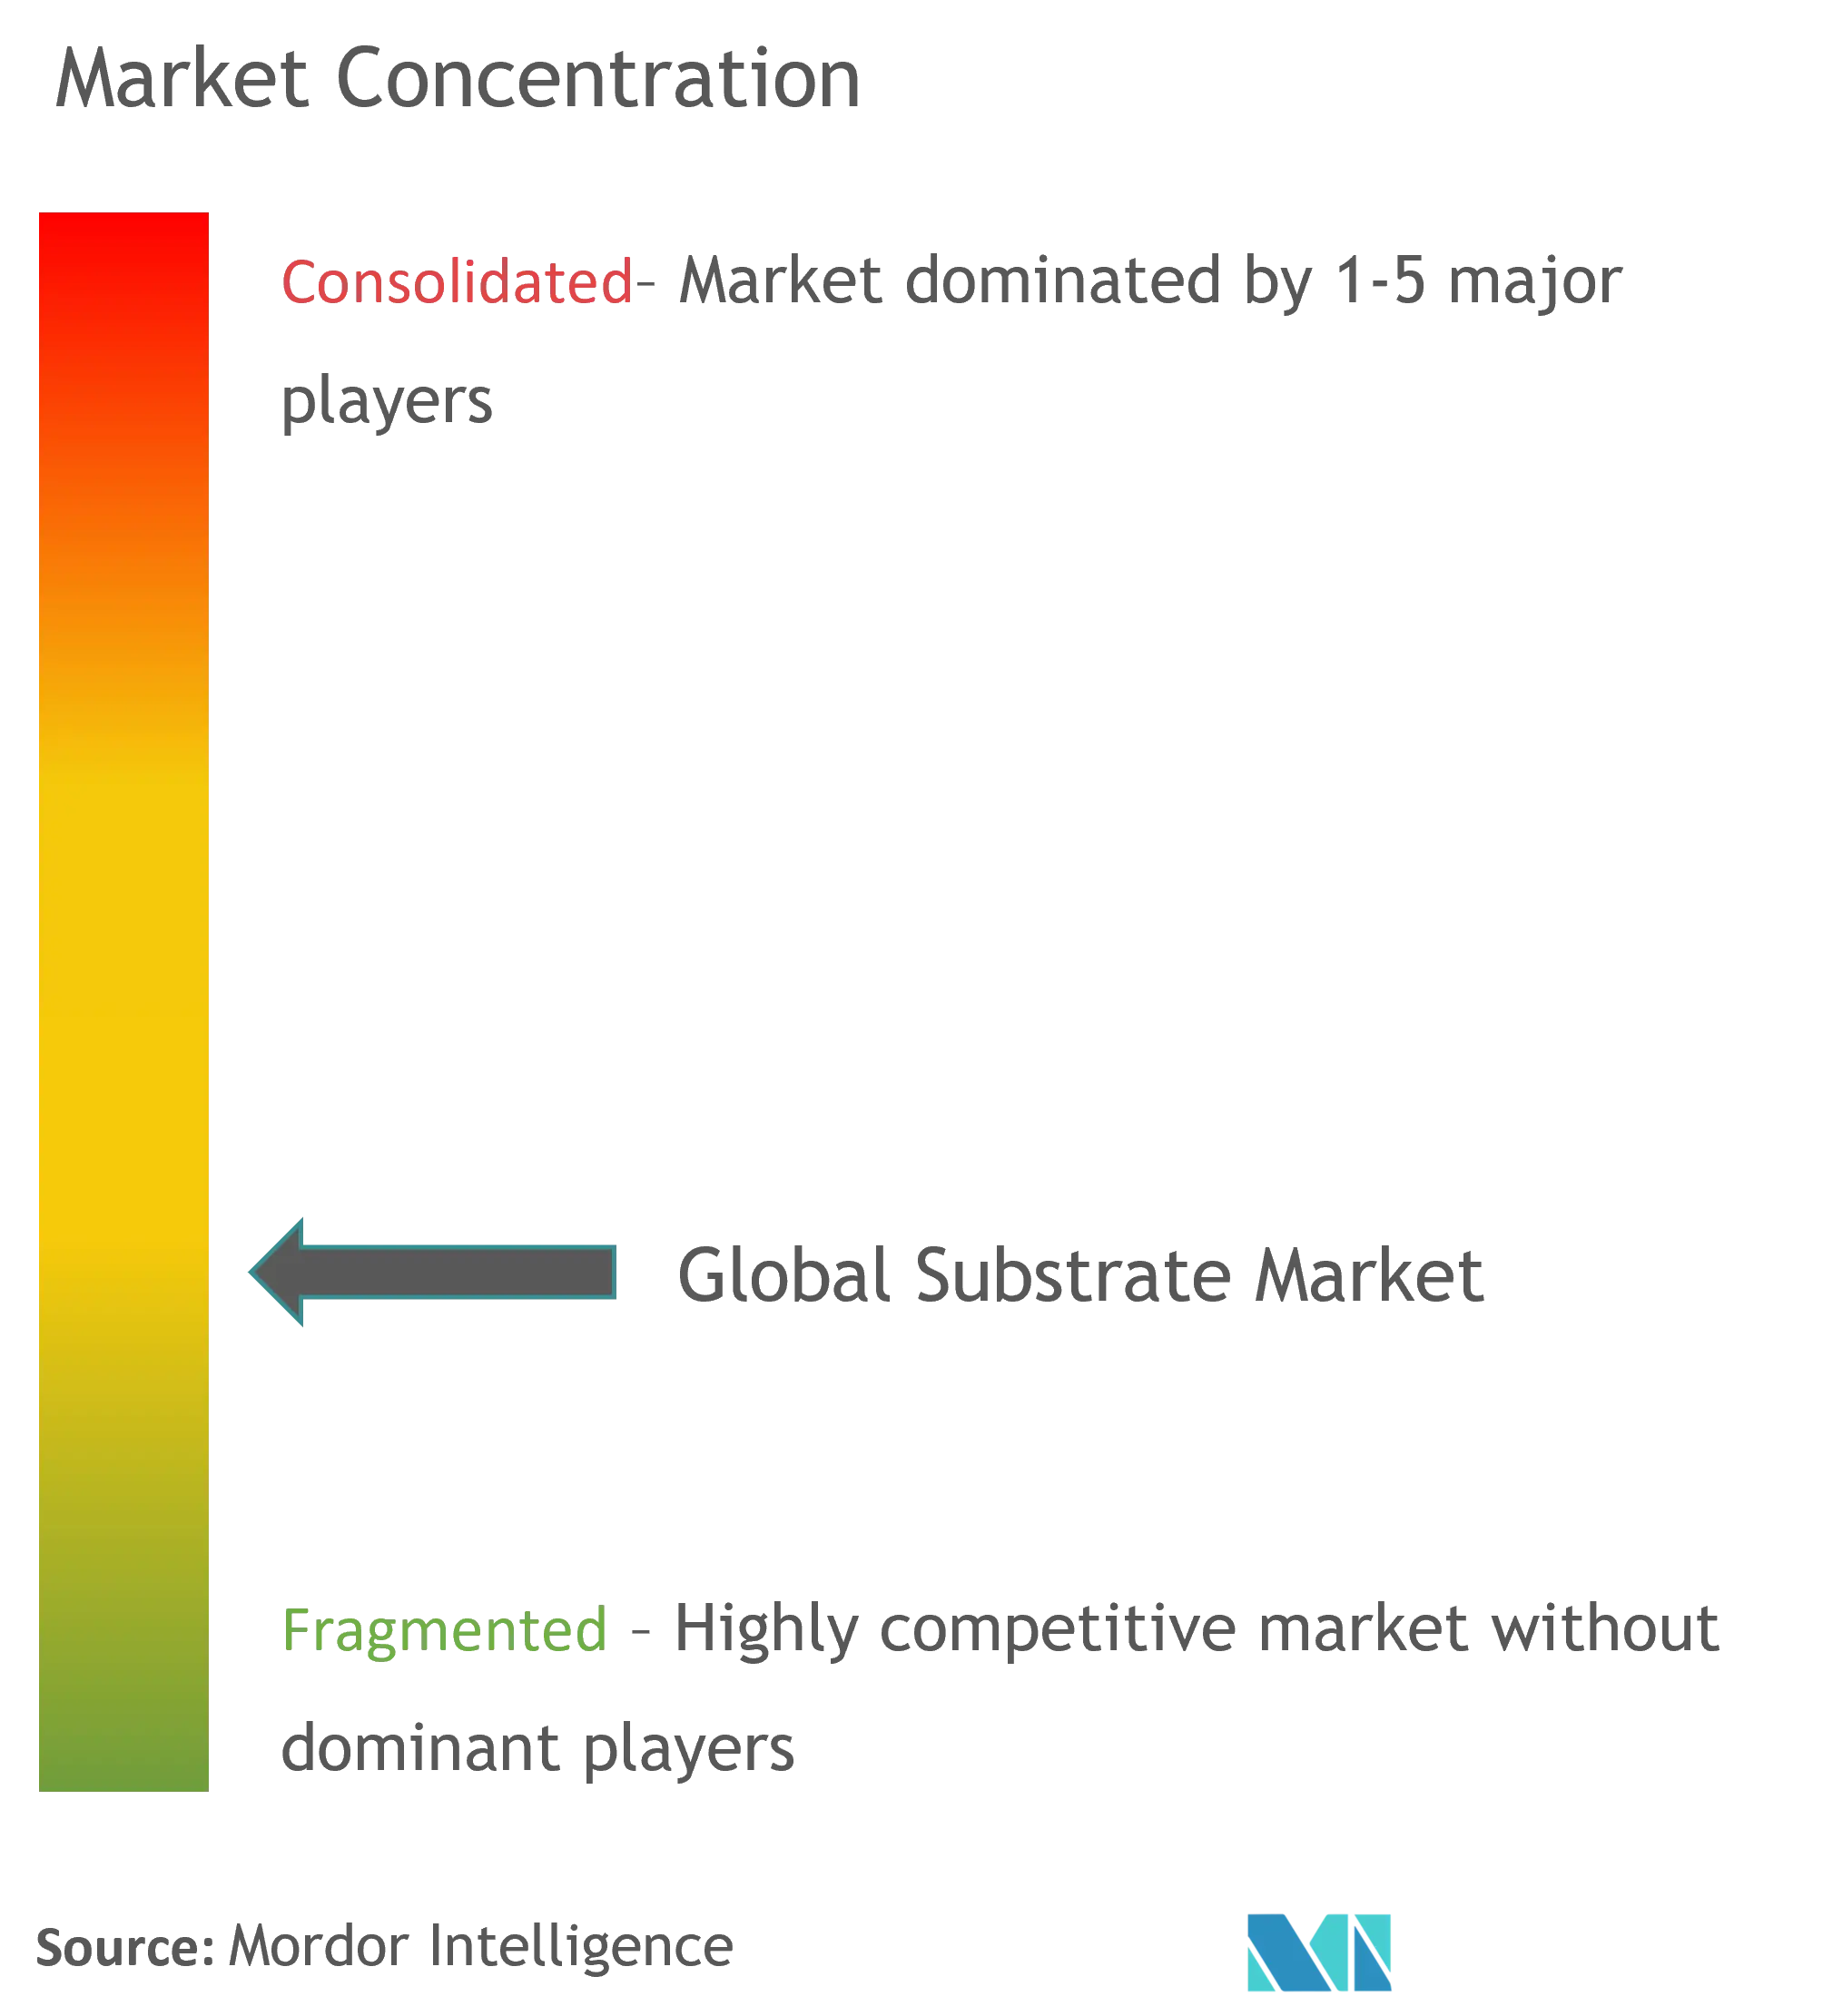 Global Substrate Market Concentration